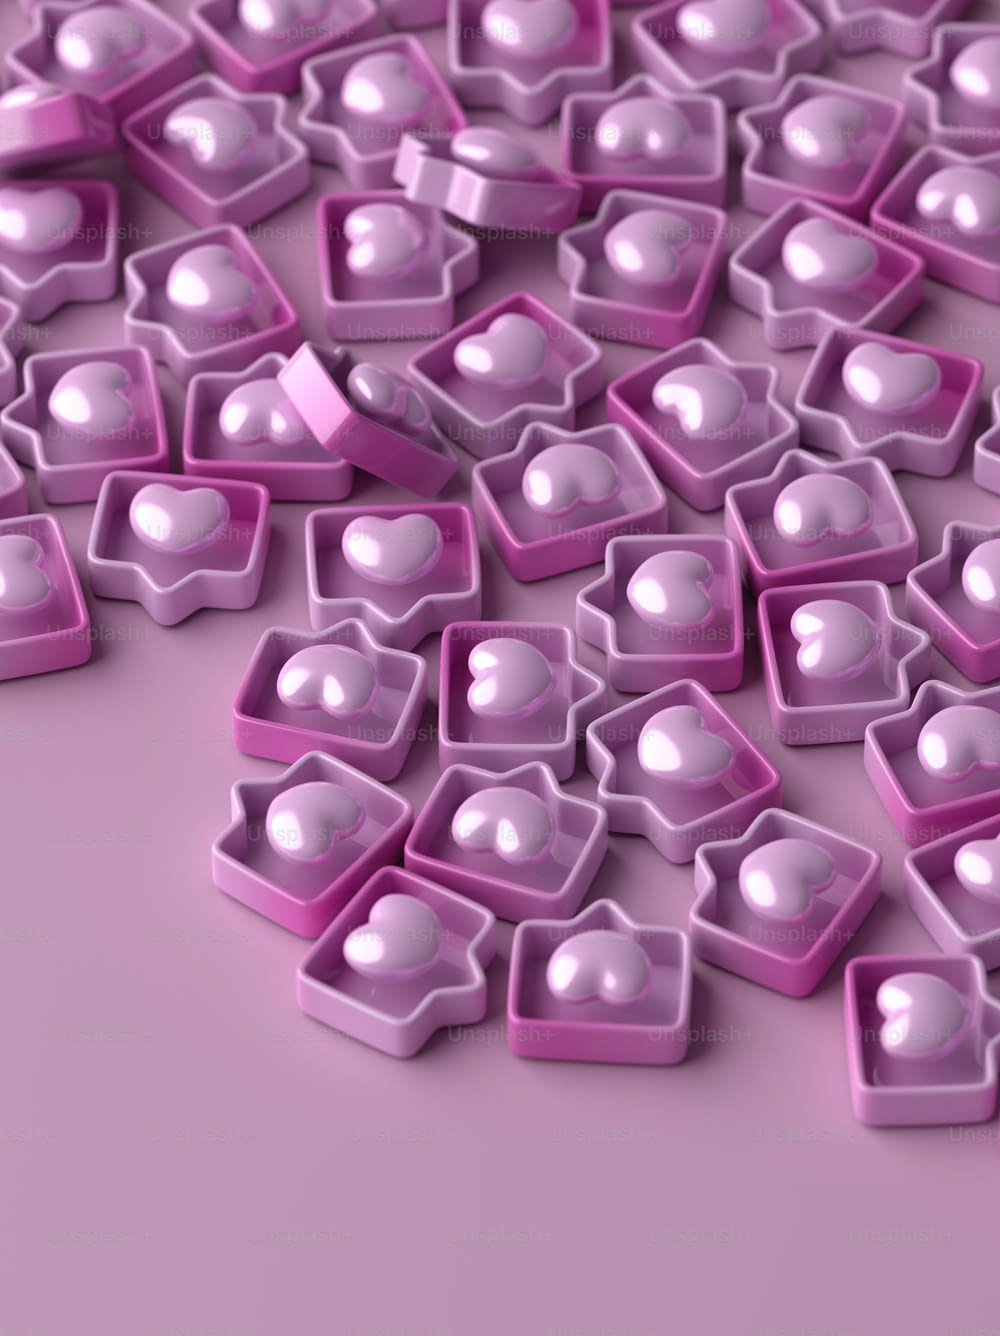 a pile of purple plastic hearts on a pink surface